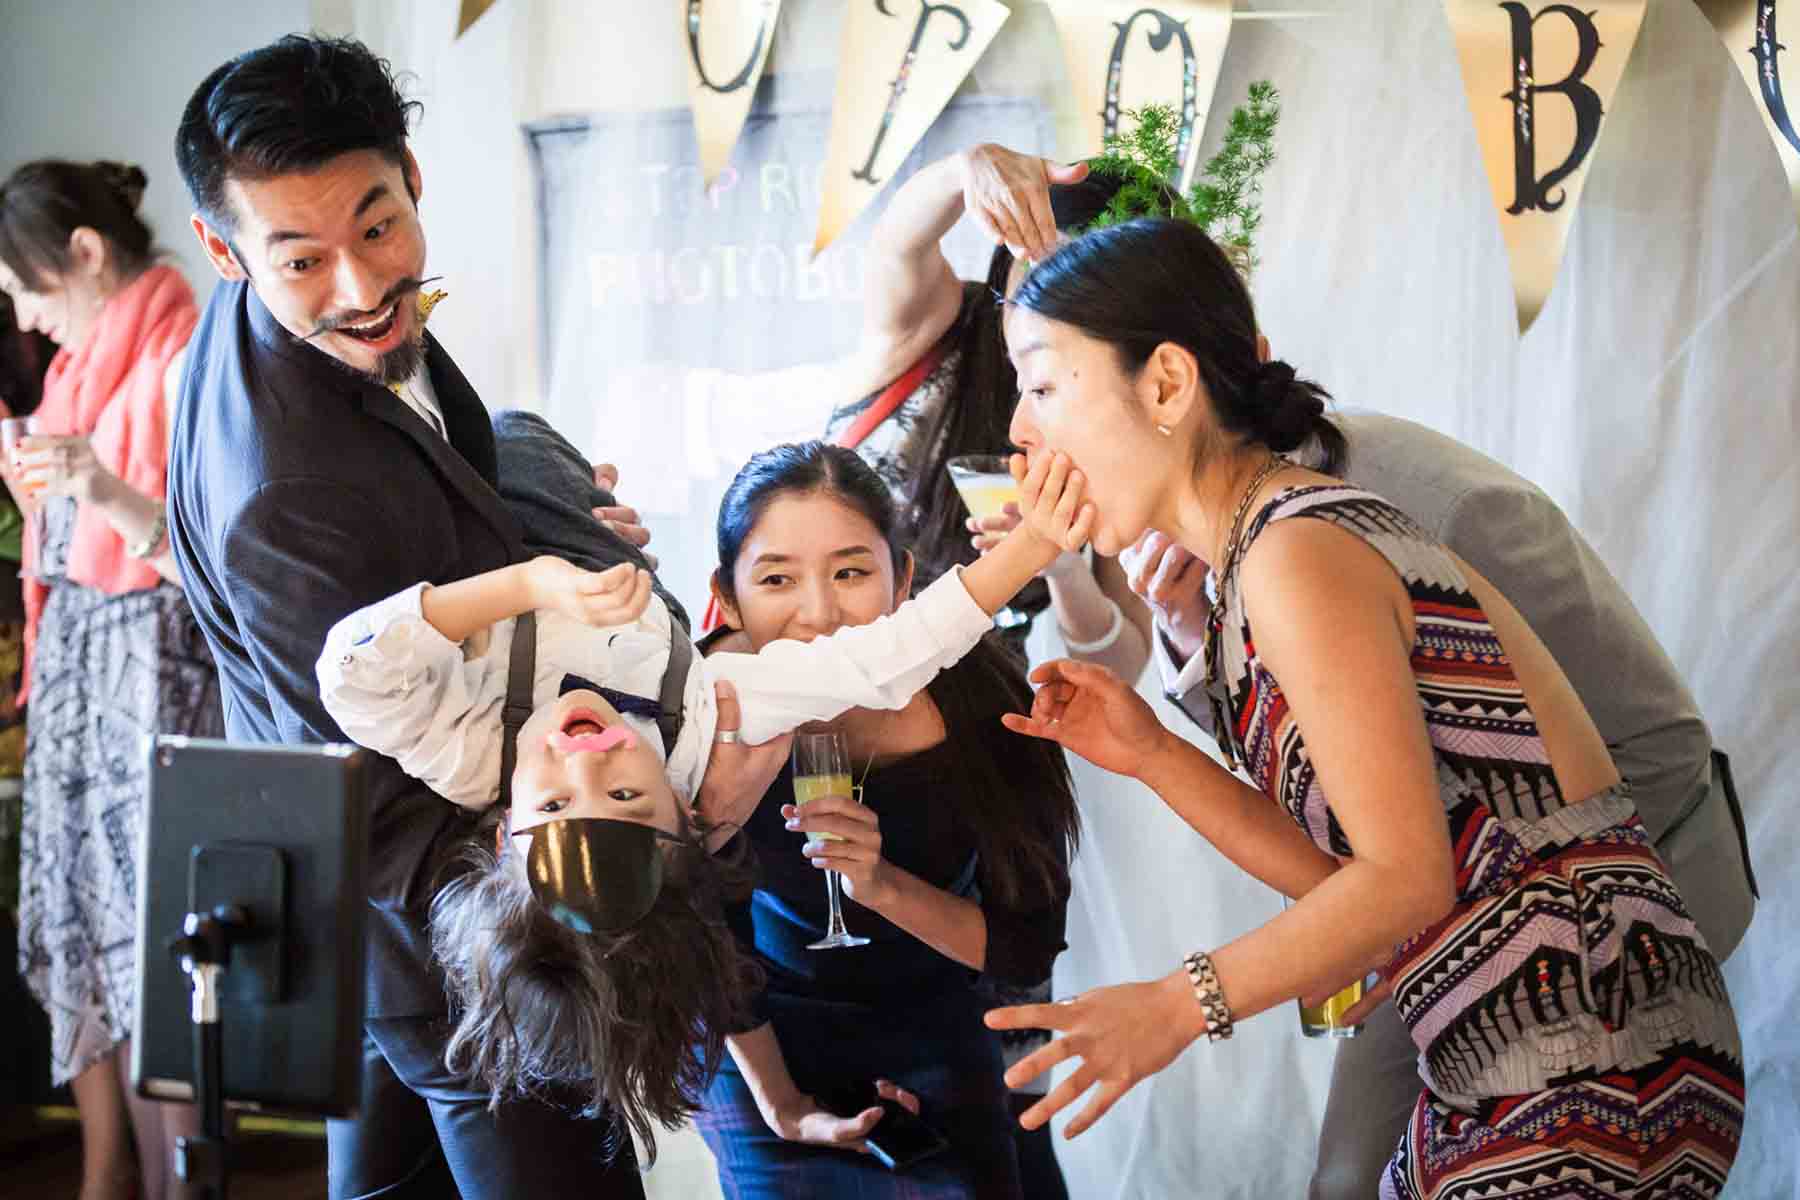 Guests holding up little boy and having fun in front of camera for an article on the best wedding jobs for family and friends